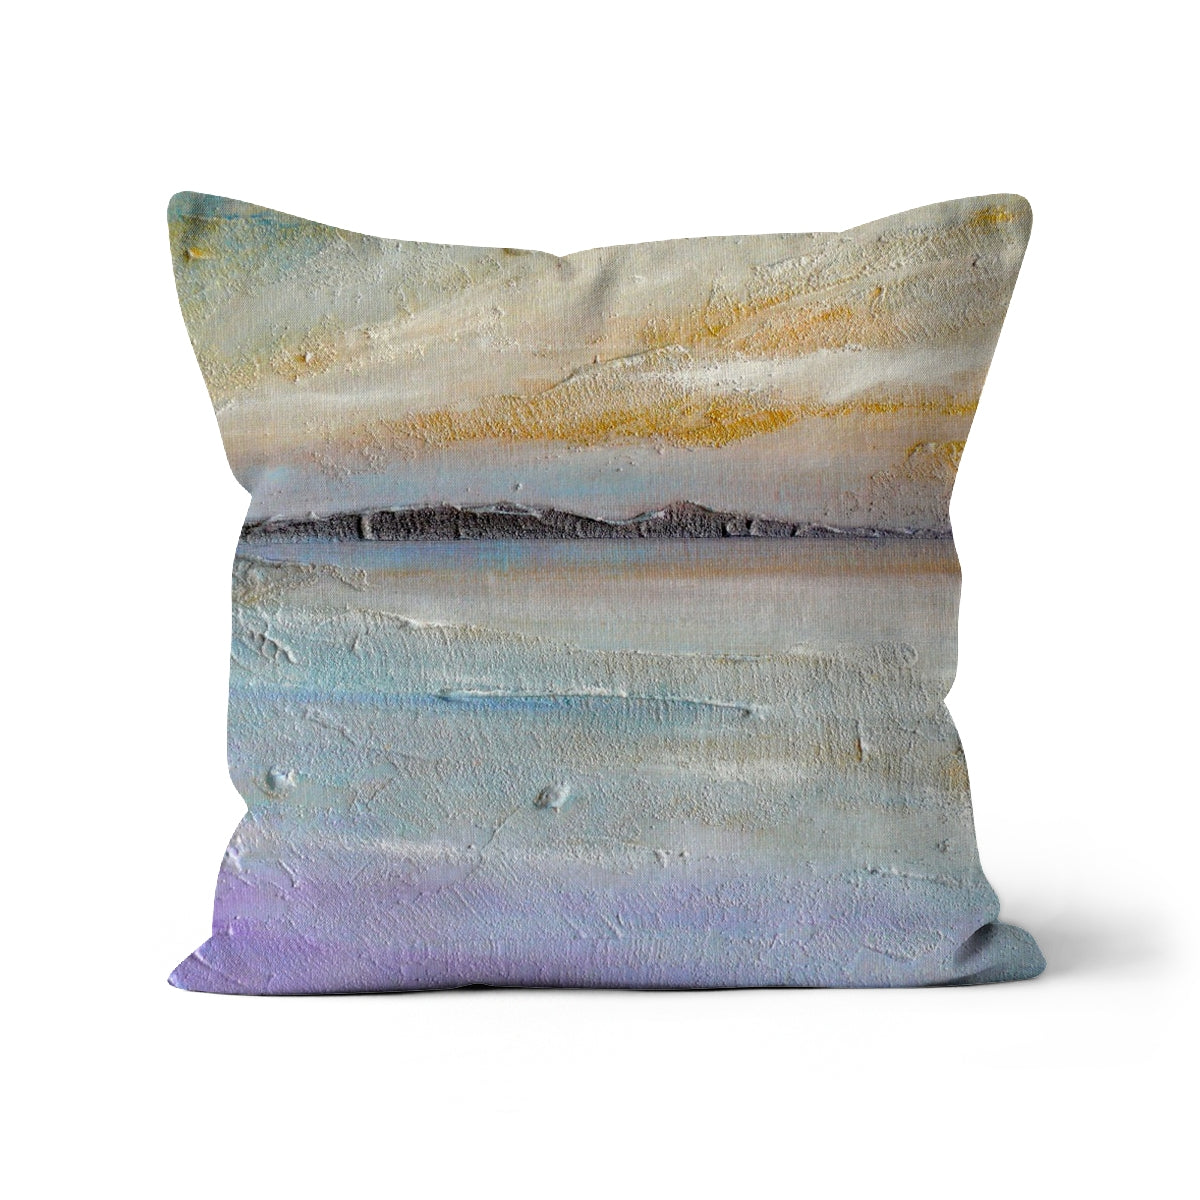 Sollas Beach South Uist Art Gifts Cushion-Cushions-Hebridean Islands Art Gallery-Faux Suede-12"x12"-Paintings, Prints, Homeware, Art Gifts From Scotland By Scottish Artist Kevin Hunter